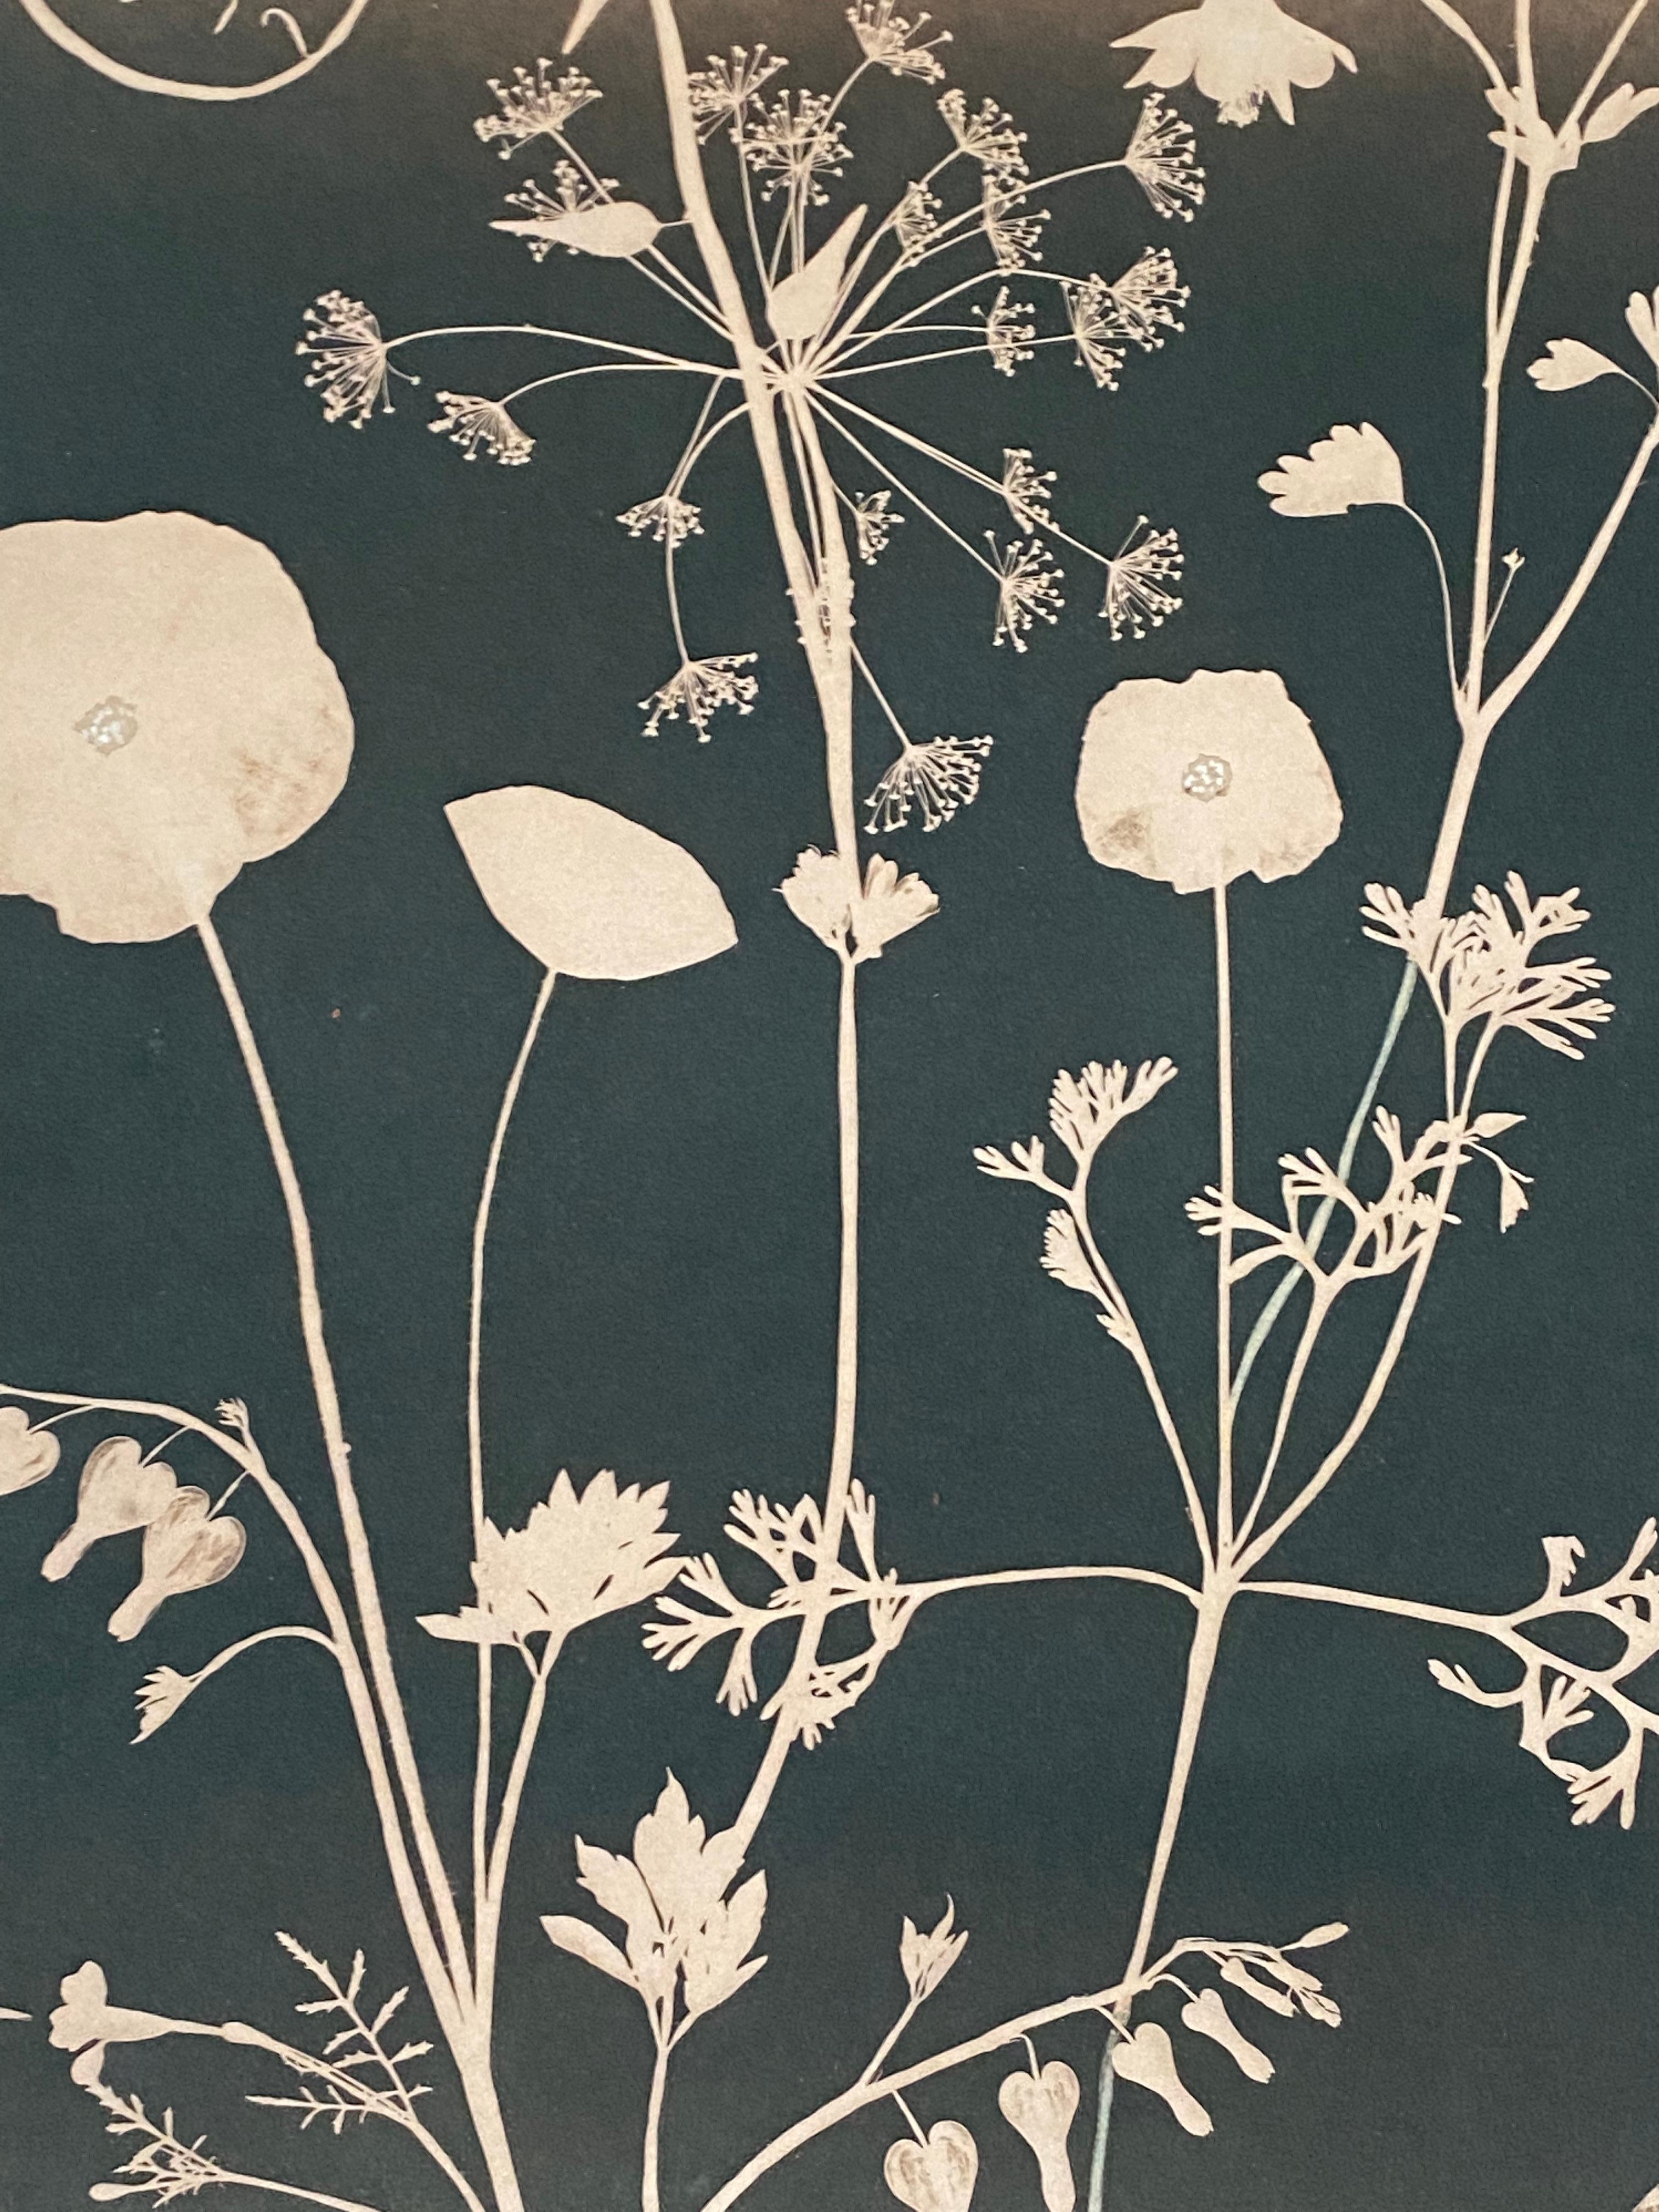 In this vertical work in watercolor, gouache, and tea toned cyanotype on cold press watercolor paper, a cyanotype print impression of flowers, including poppies, bleeding hearts, and a humming bird are depicted in a luminous shade of pale sienna